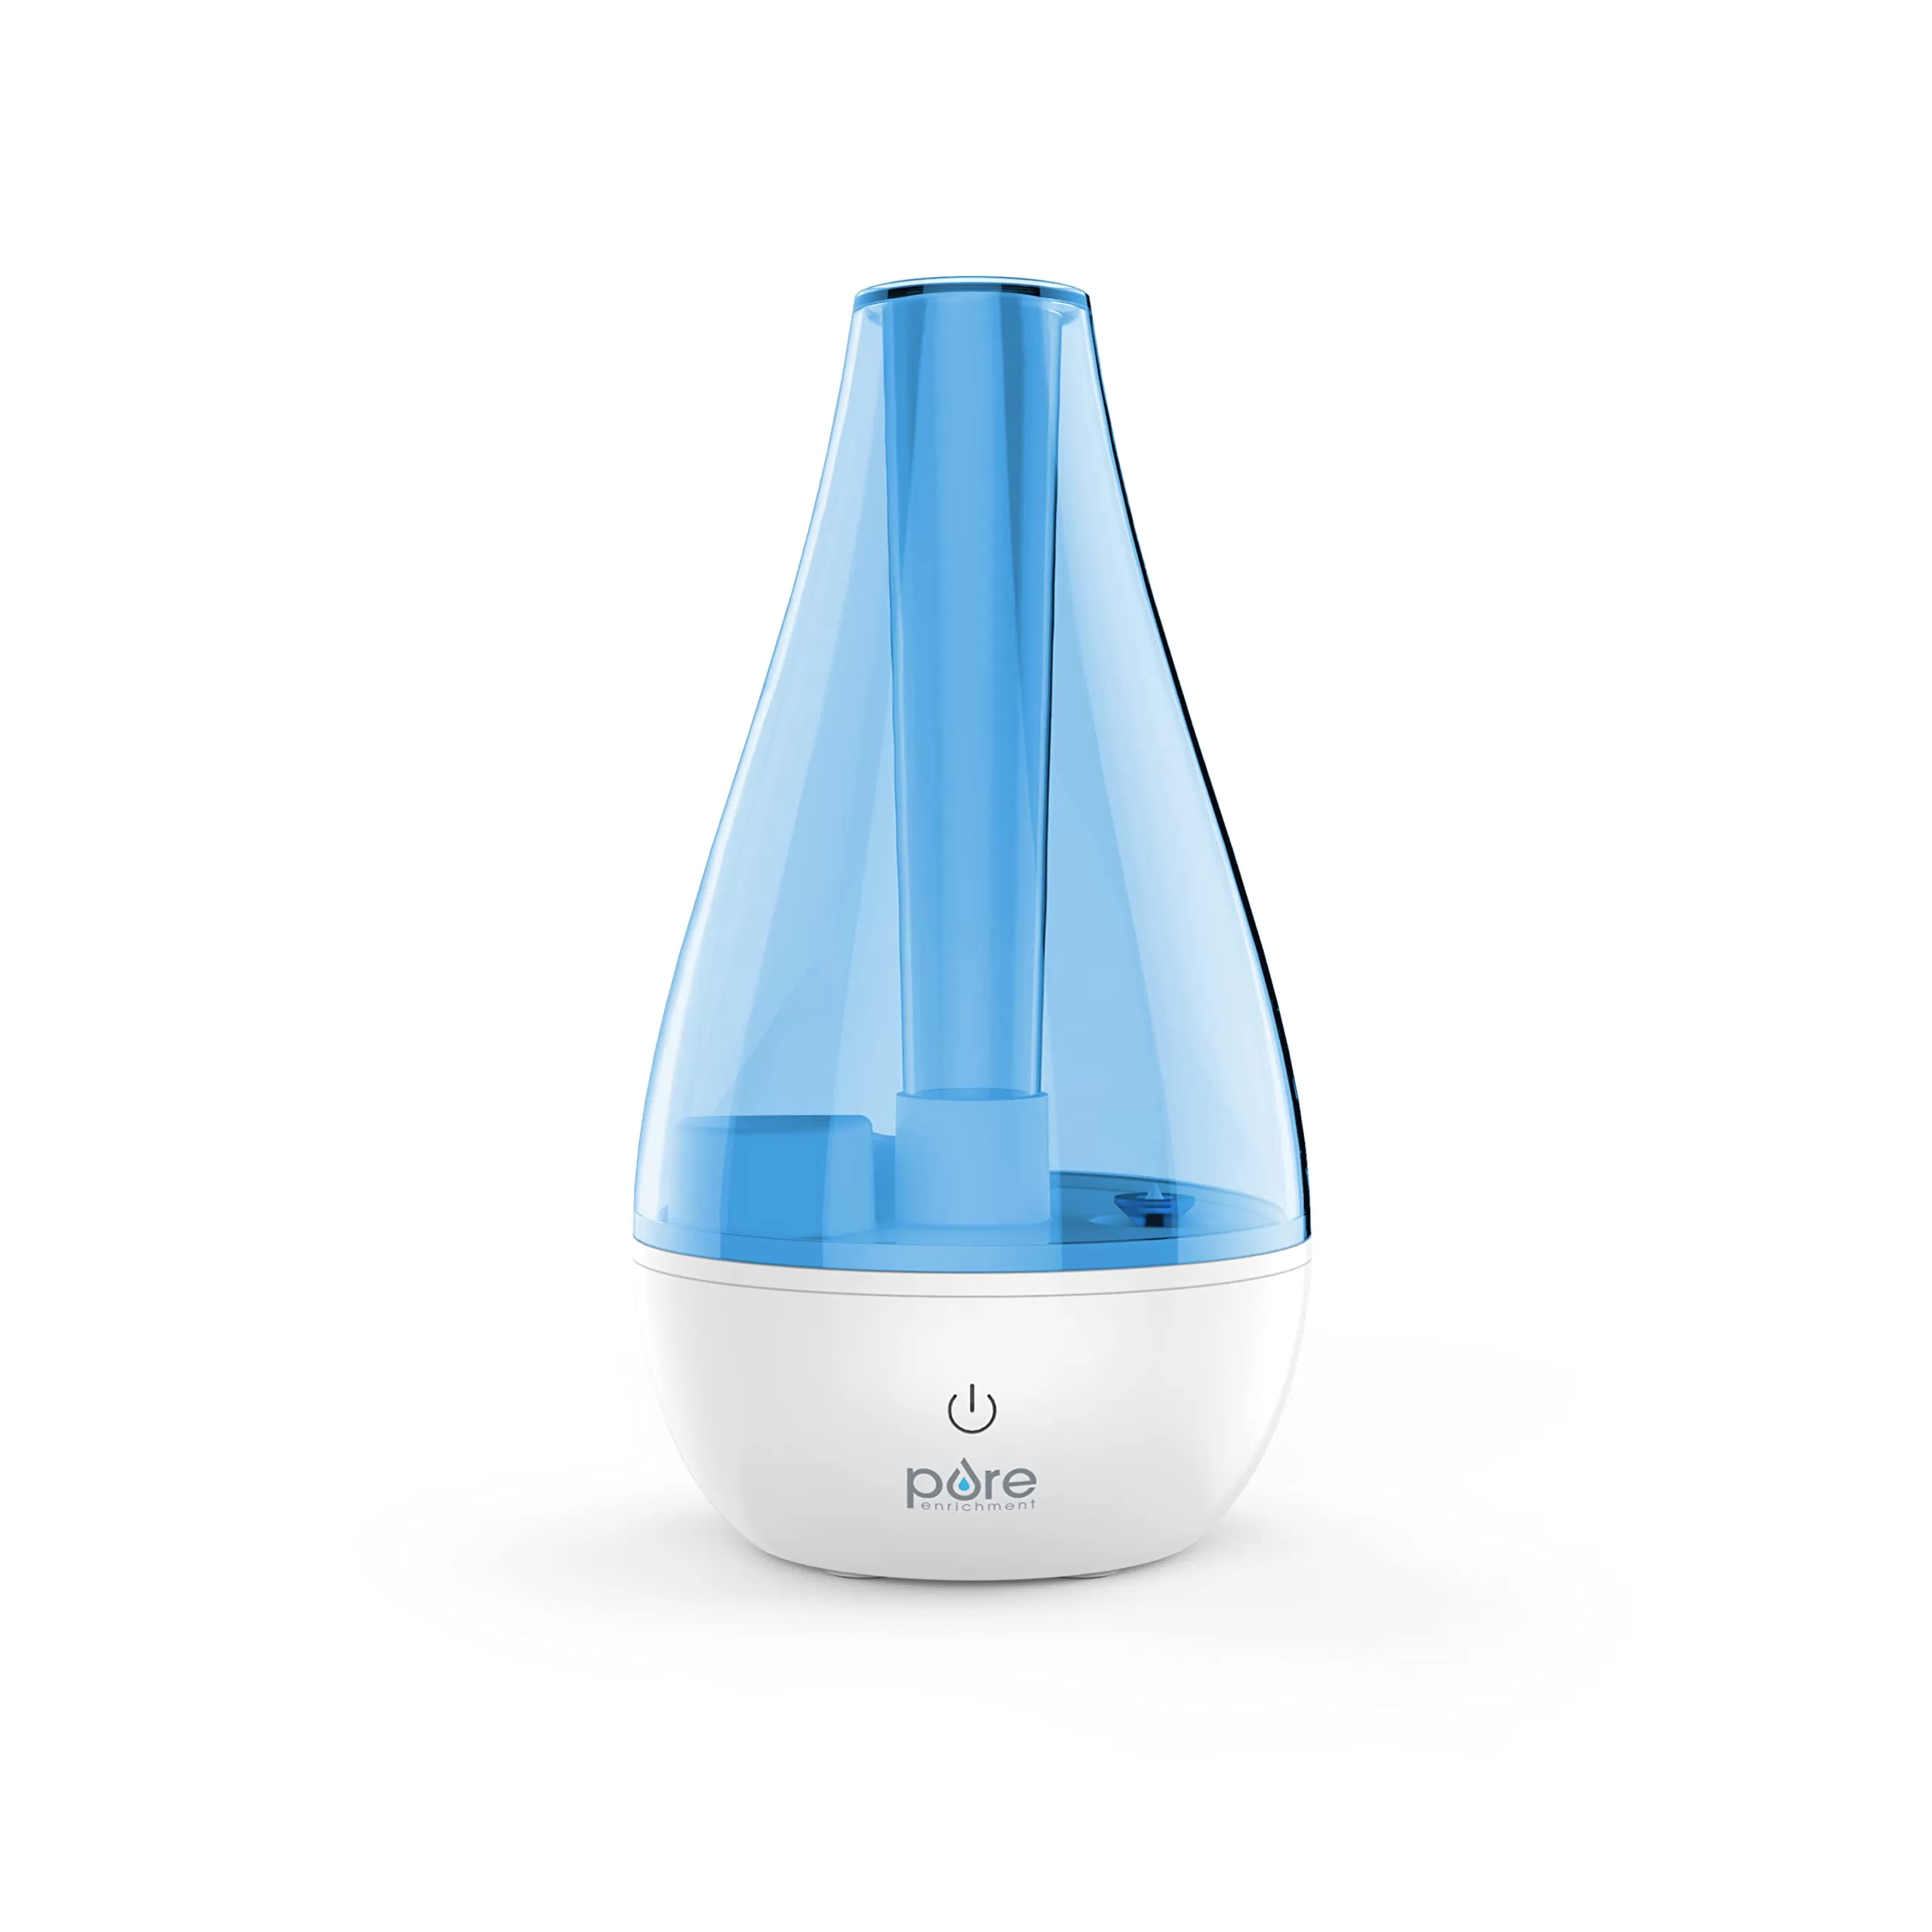 pore Travel Humidifiers